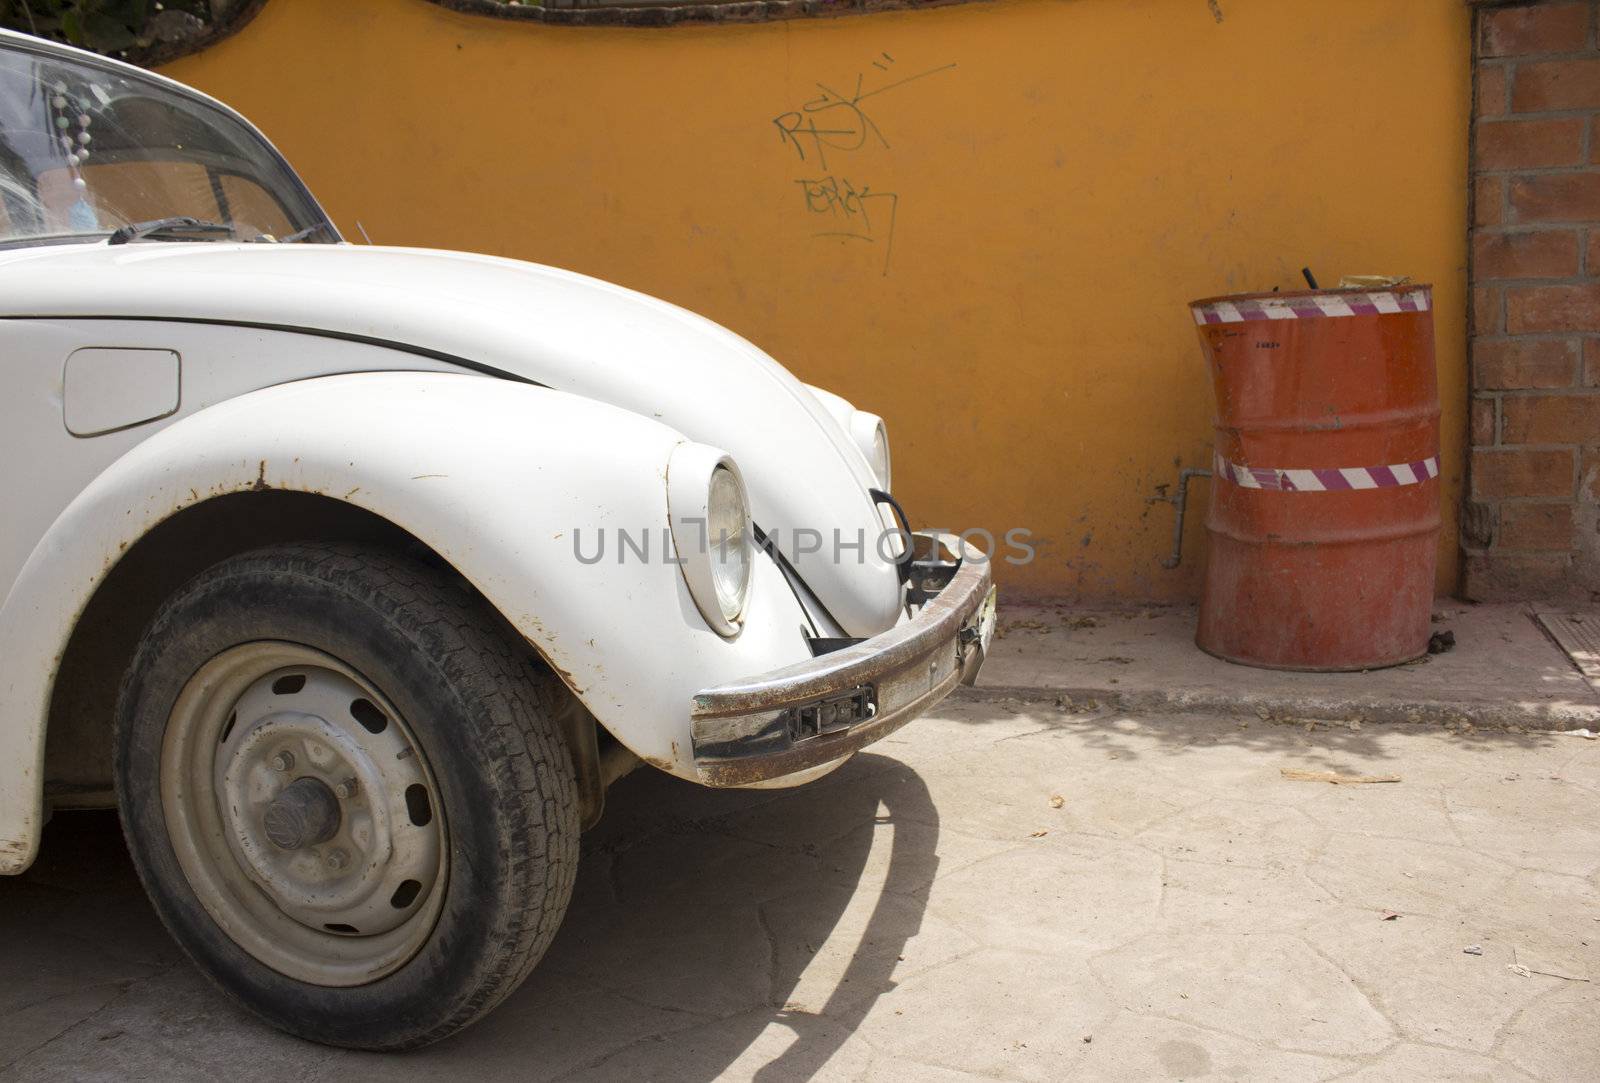 An old white car parked on the side of the road in mexico.